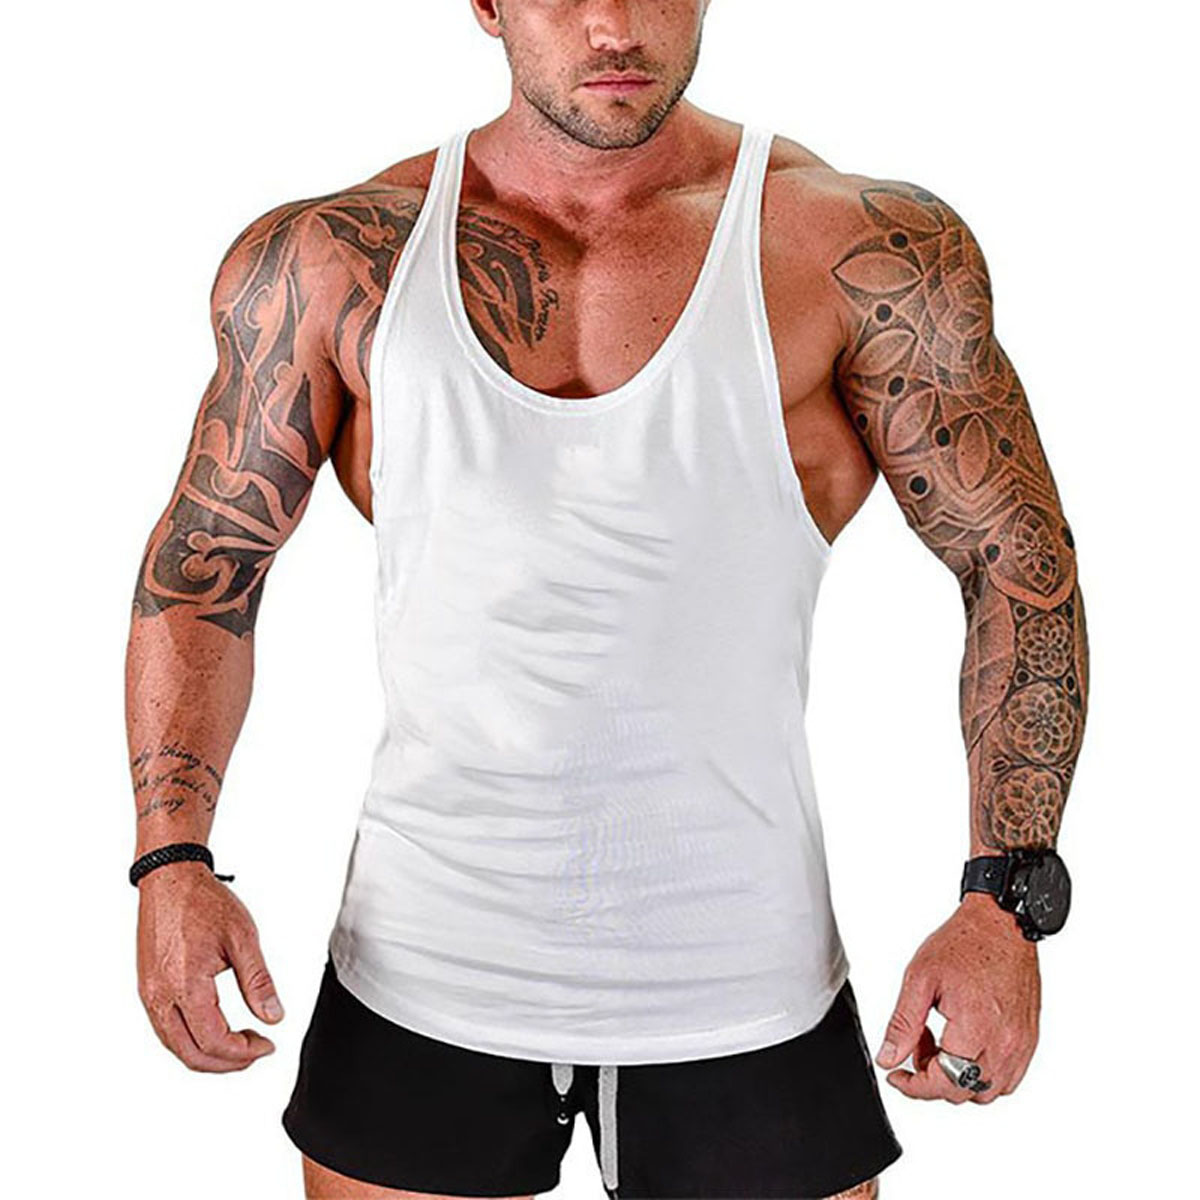 Herrnalise Men's Muscle Gym Workout Men Casual Solid Tight Fitting Sports  Stripe Gym Tank Tops Vest